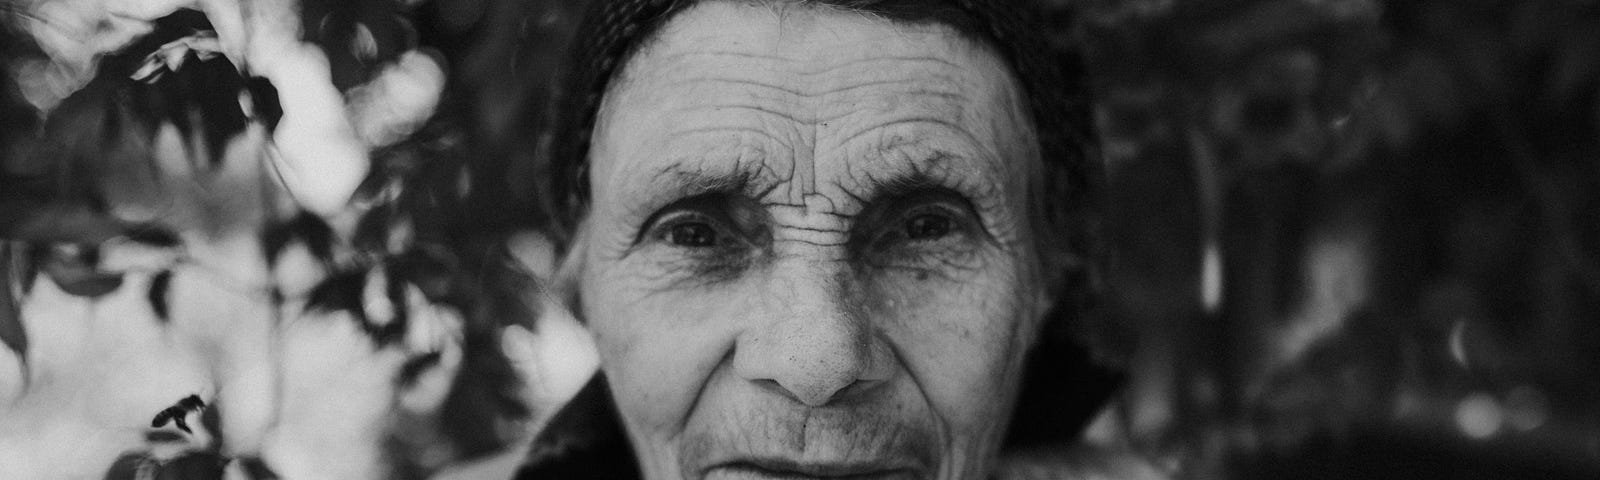 A black and white image of an old woman staring directly at the screen.